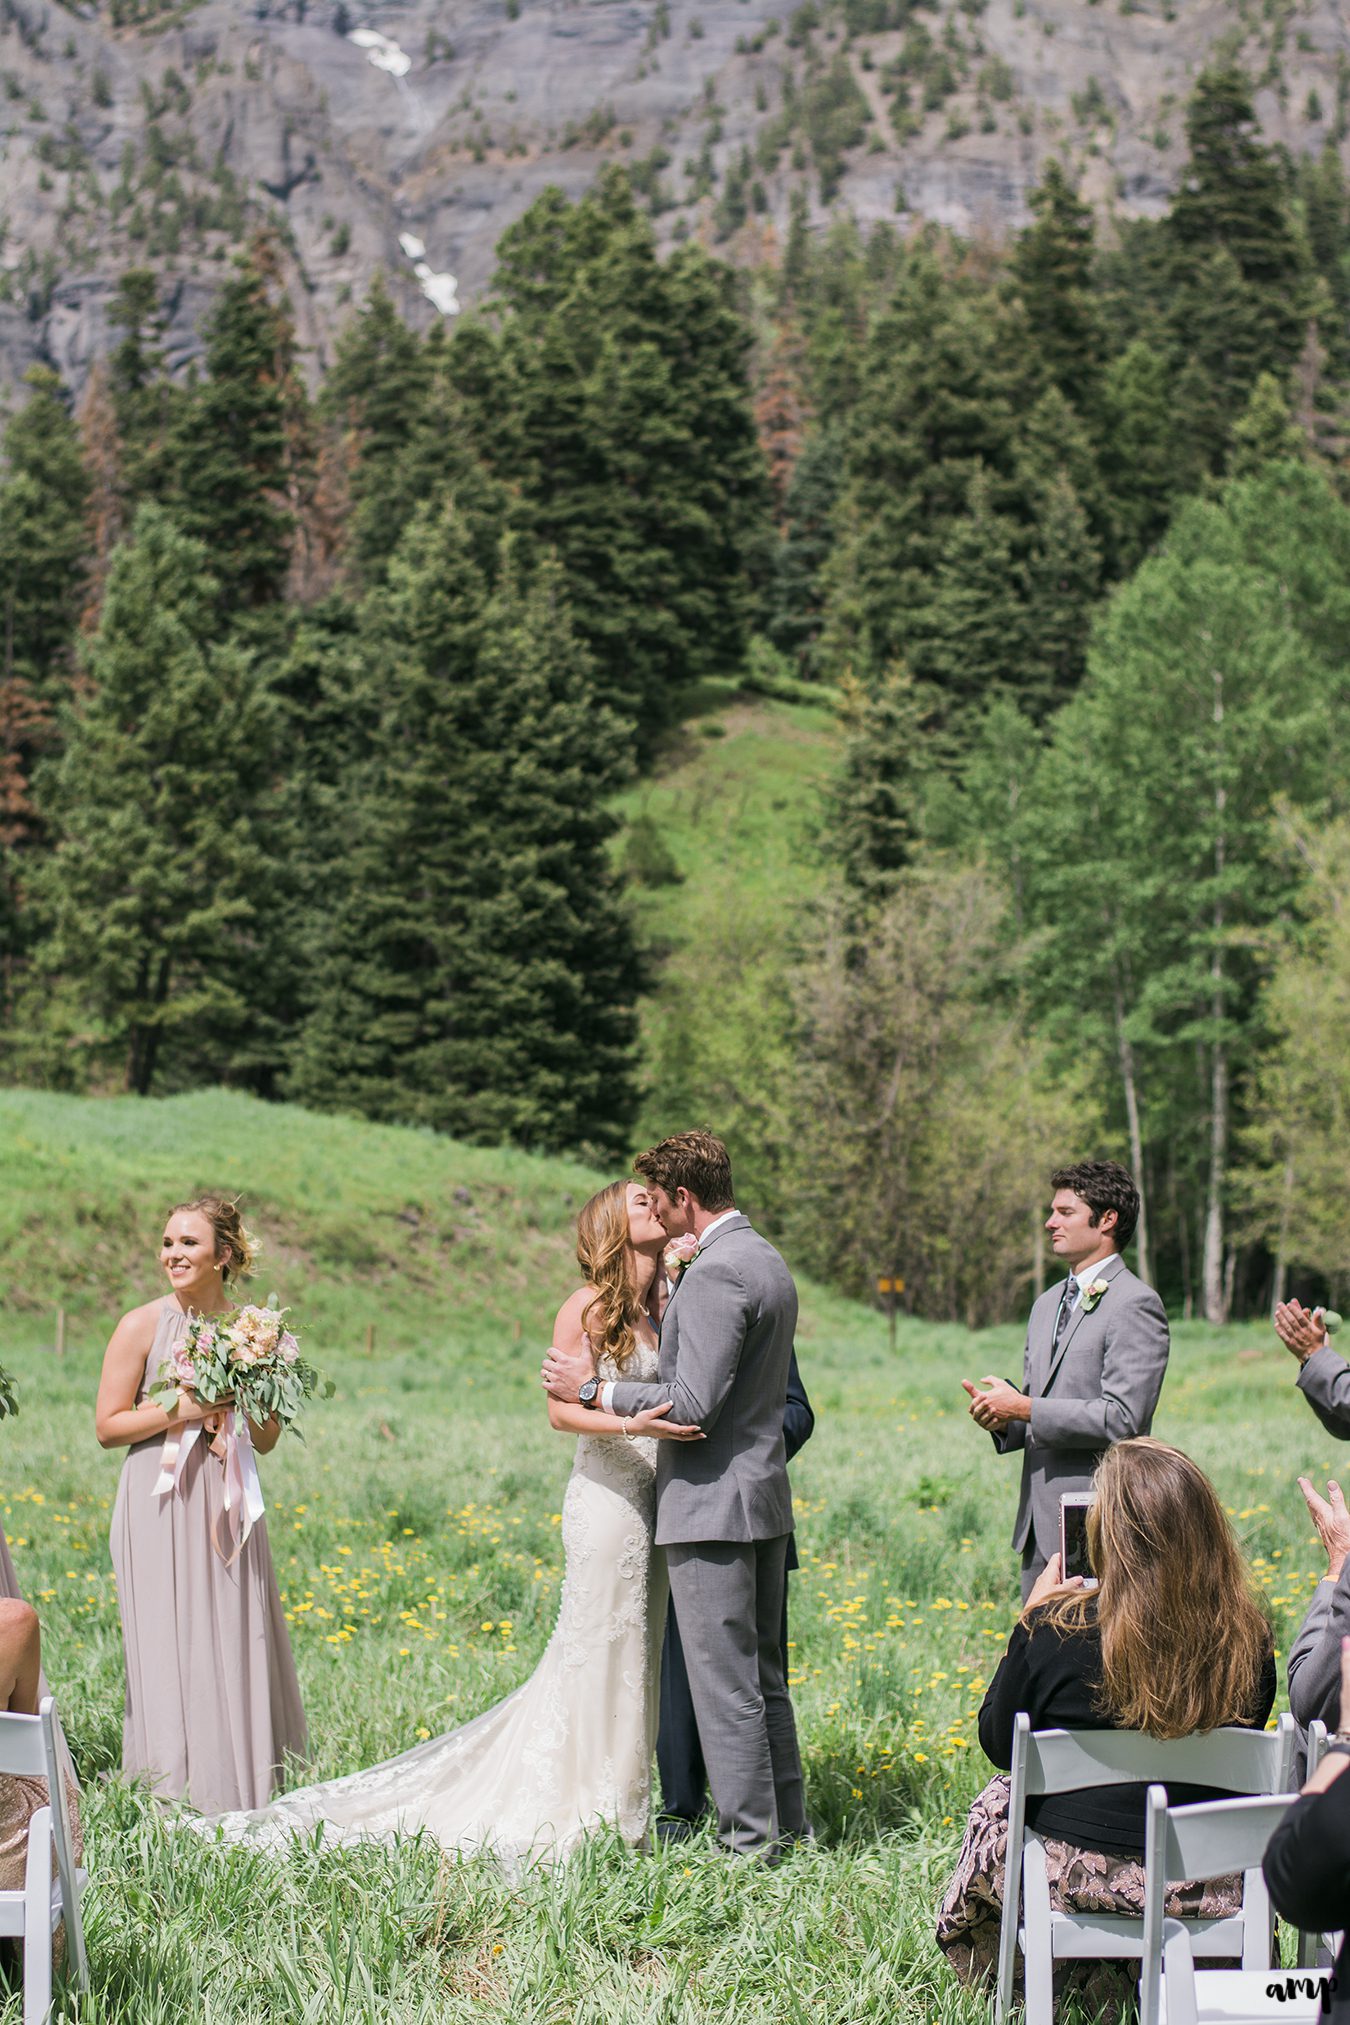 Bride and Groom's first kiss at the Ouray Amphitheater